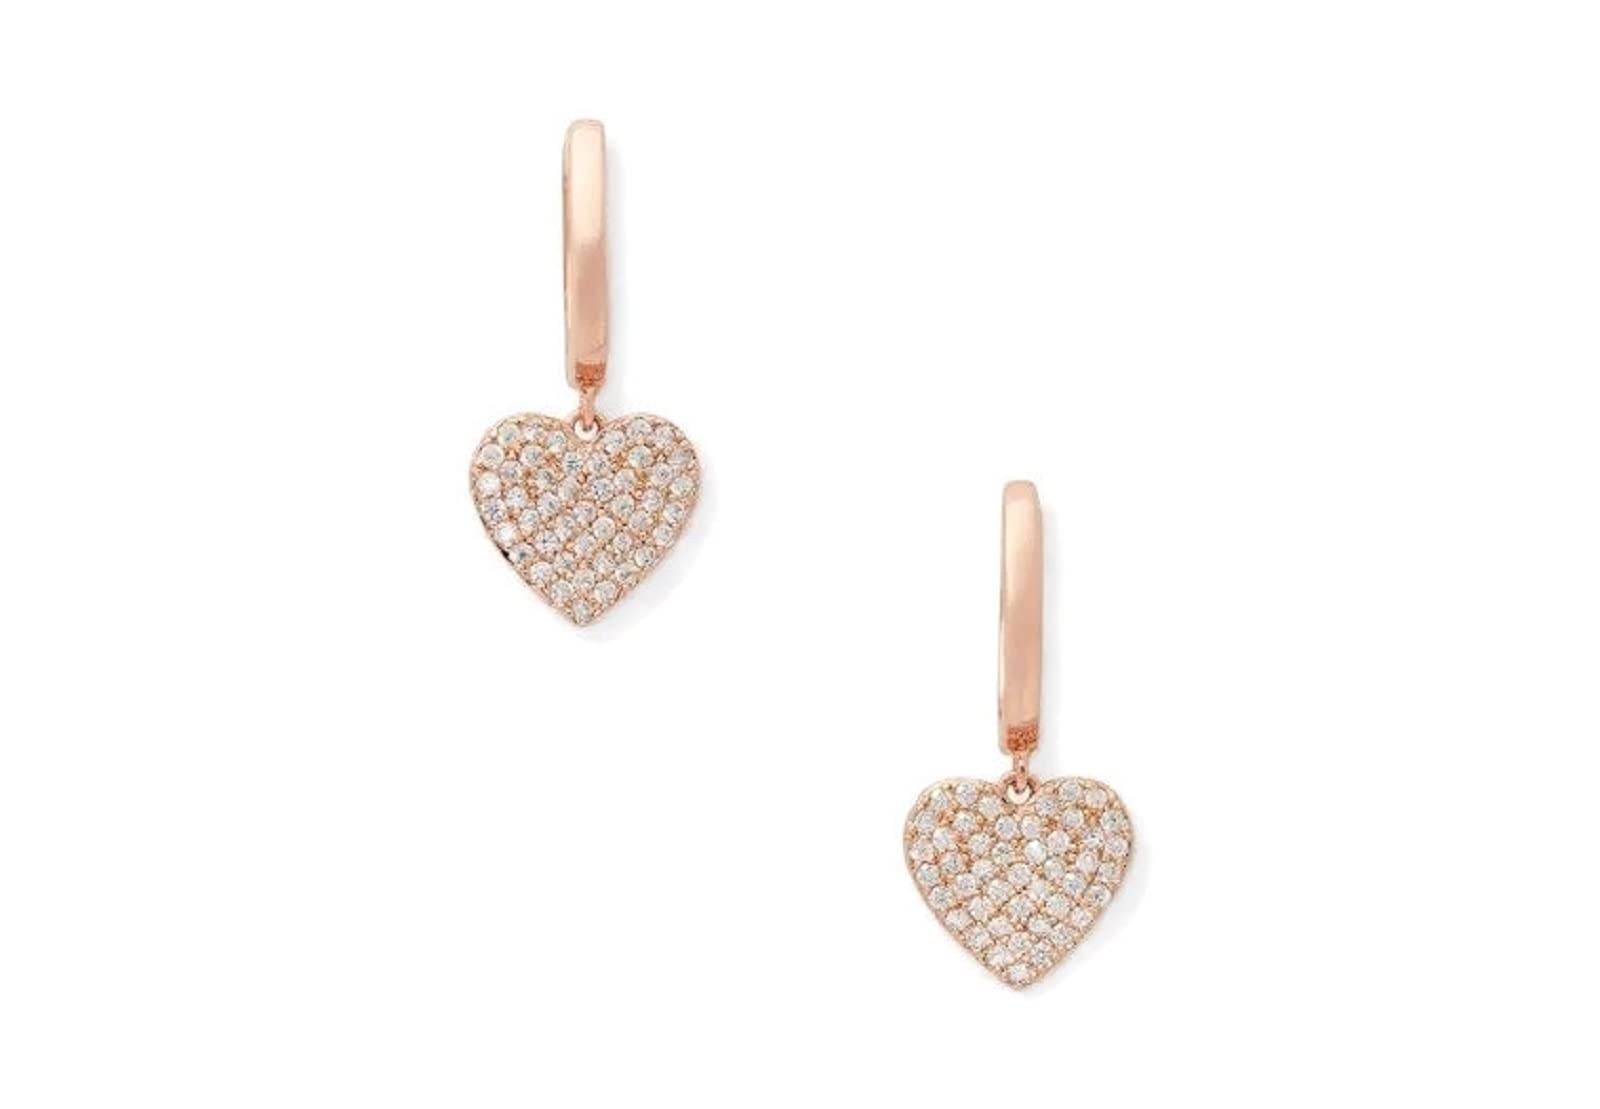 Kate Spade New York Yours Truly Pave Heart Drop Earrings, rose gold, Medium